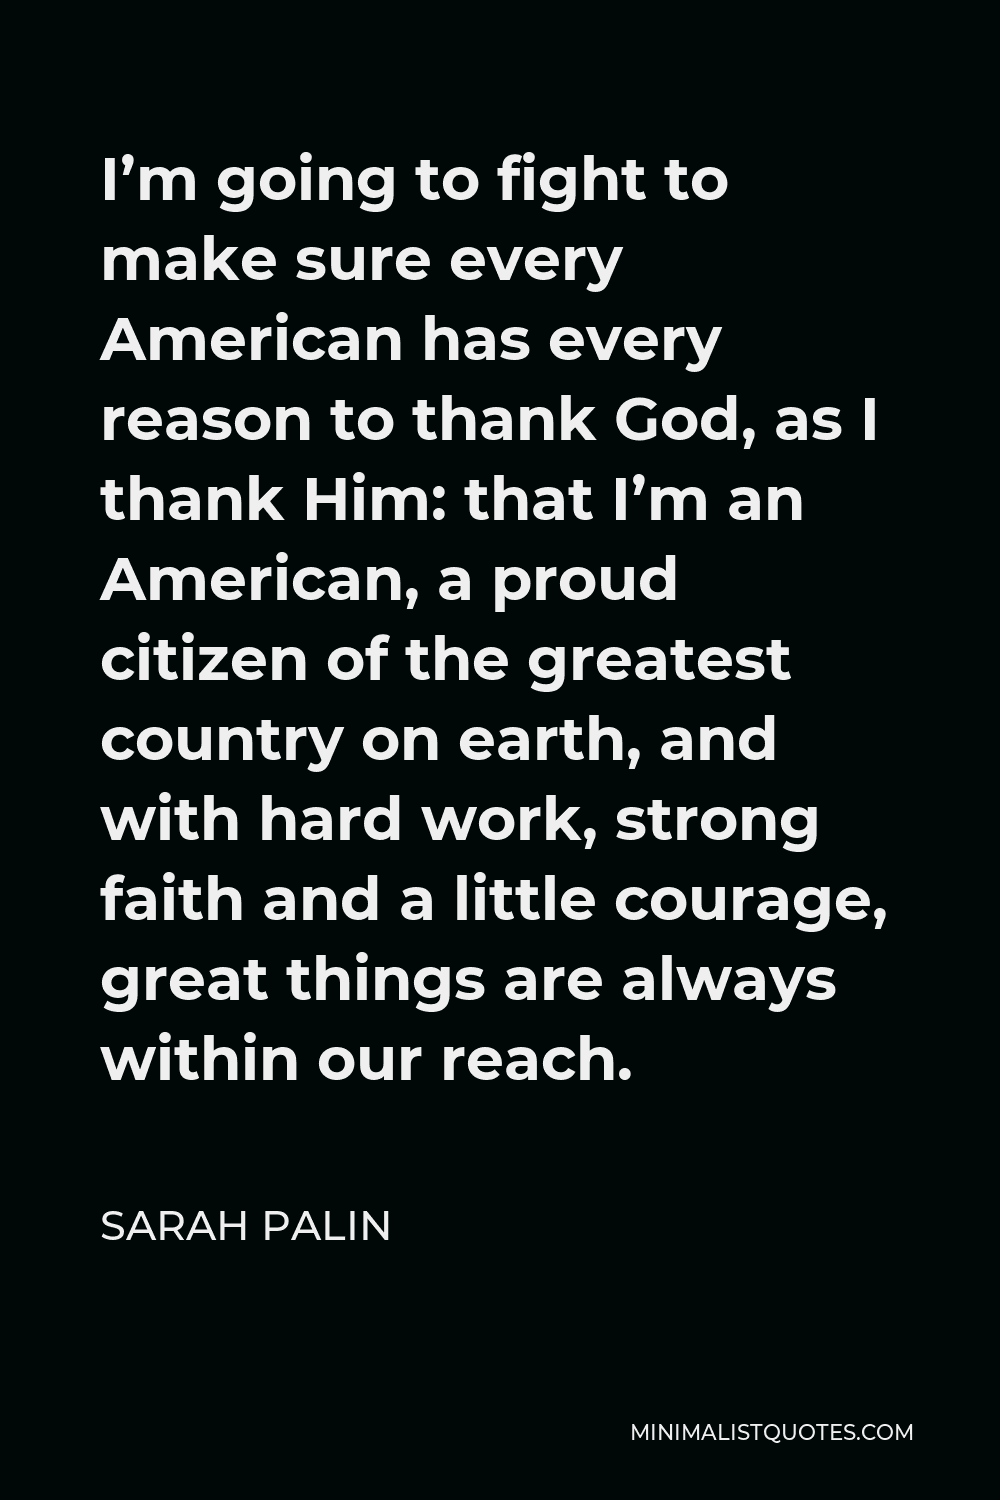 Sarah Palin Quote - I’m going to fight to make sure every American has every reason to thank God, as I thank Him: that I’m an American, a proud citizen of the greatest country on earth, and with hard work, strong faith and a little courage, great things are always within our reach.